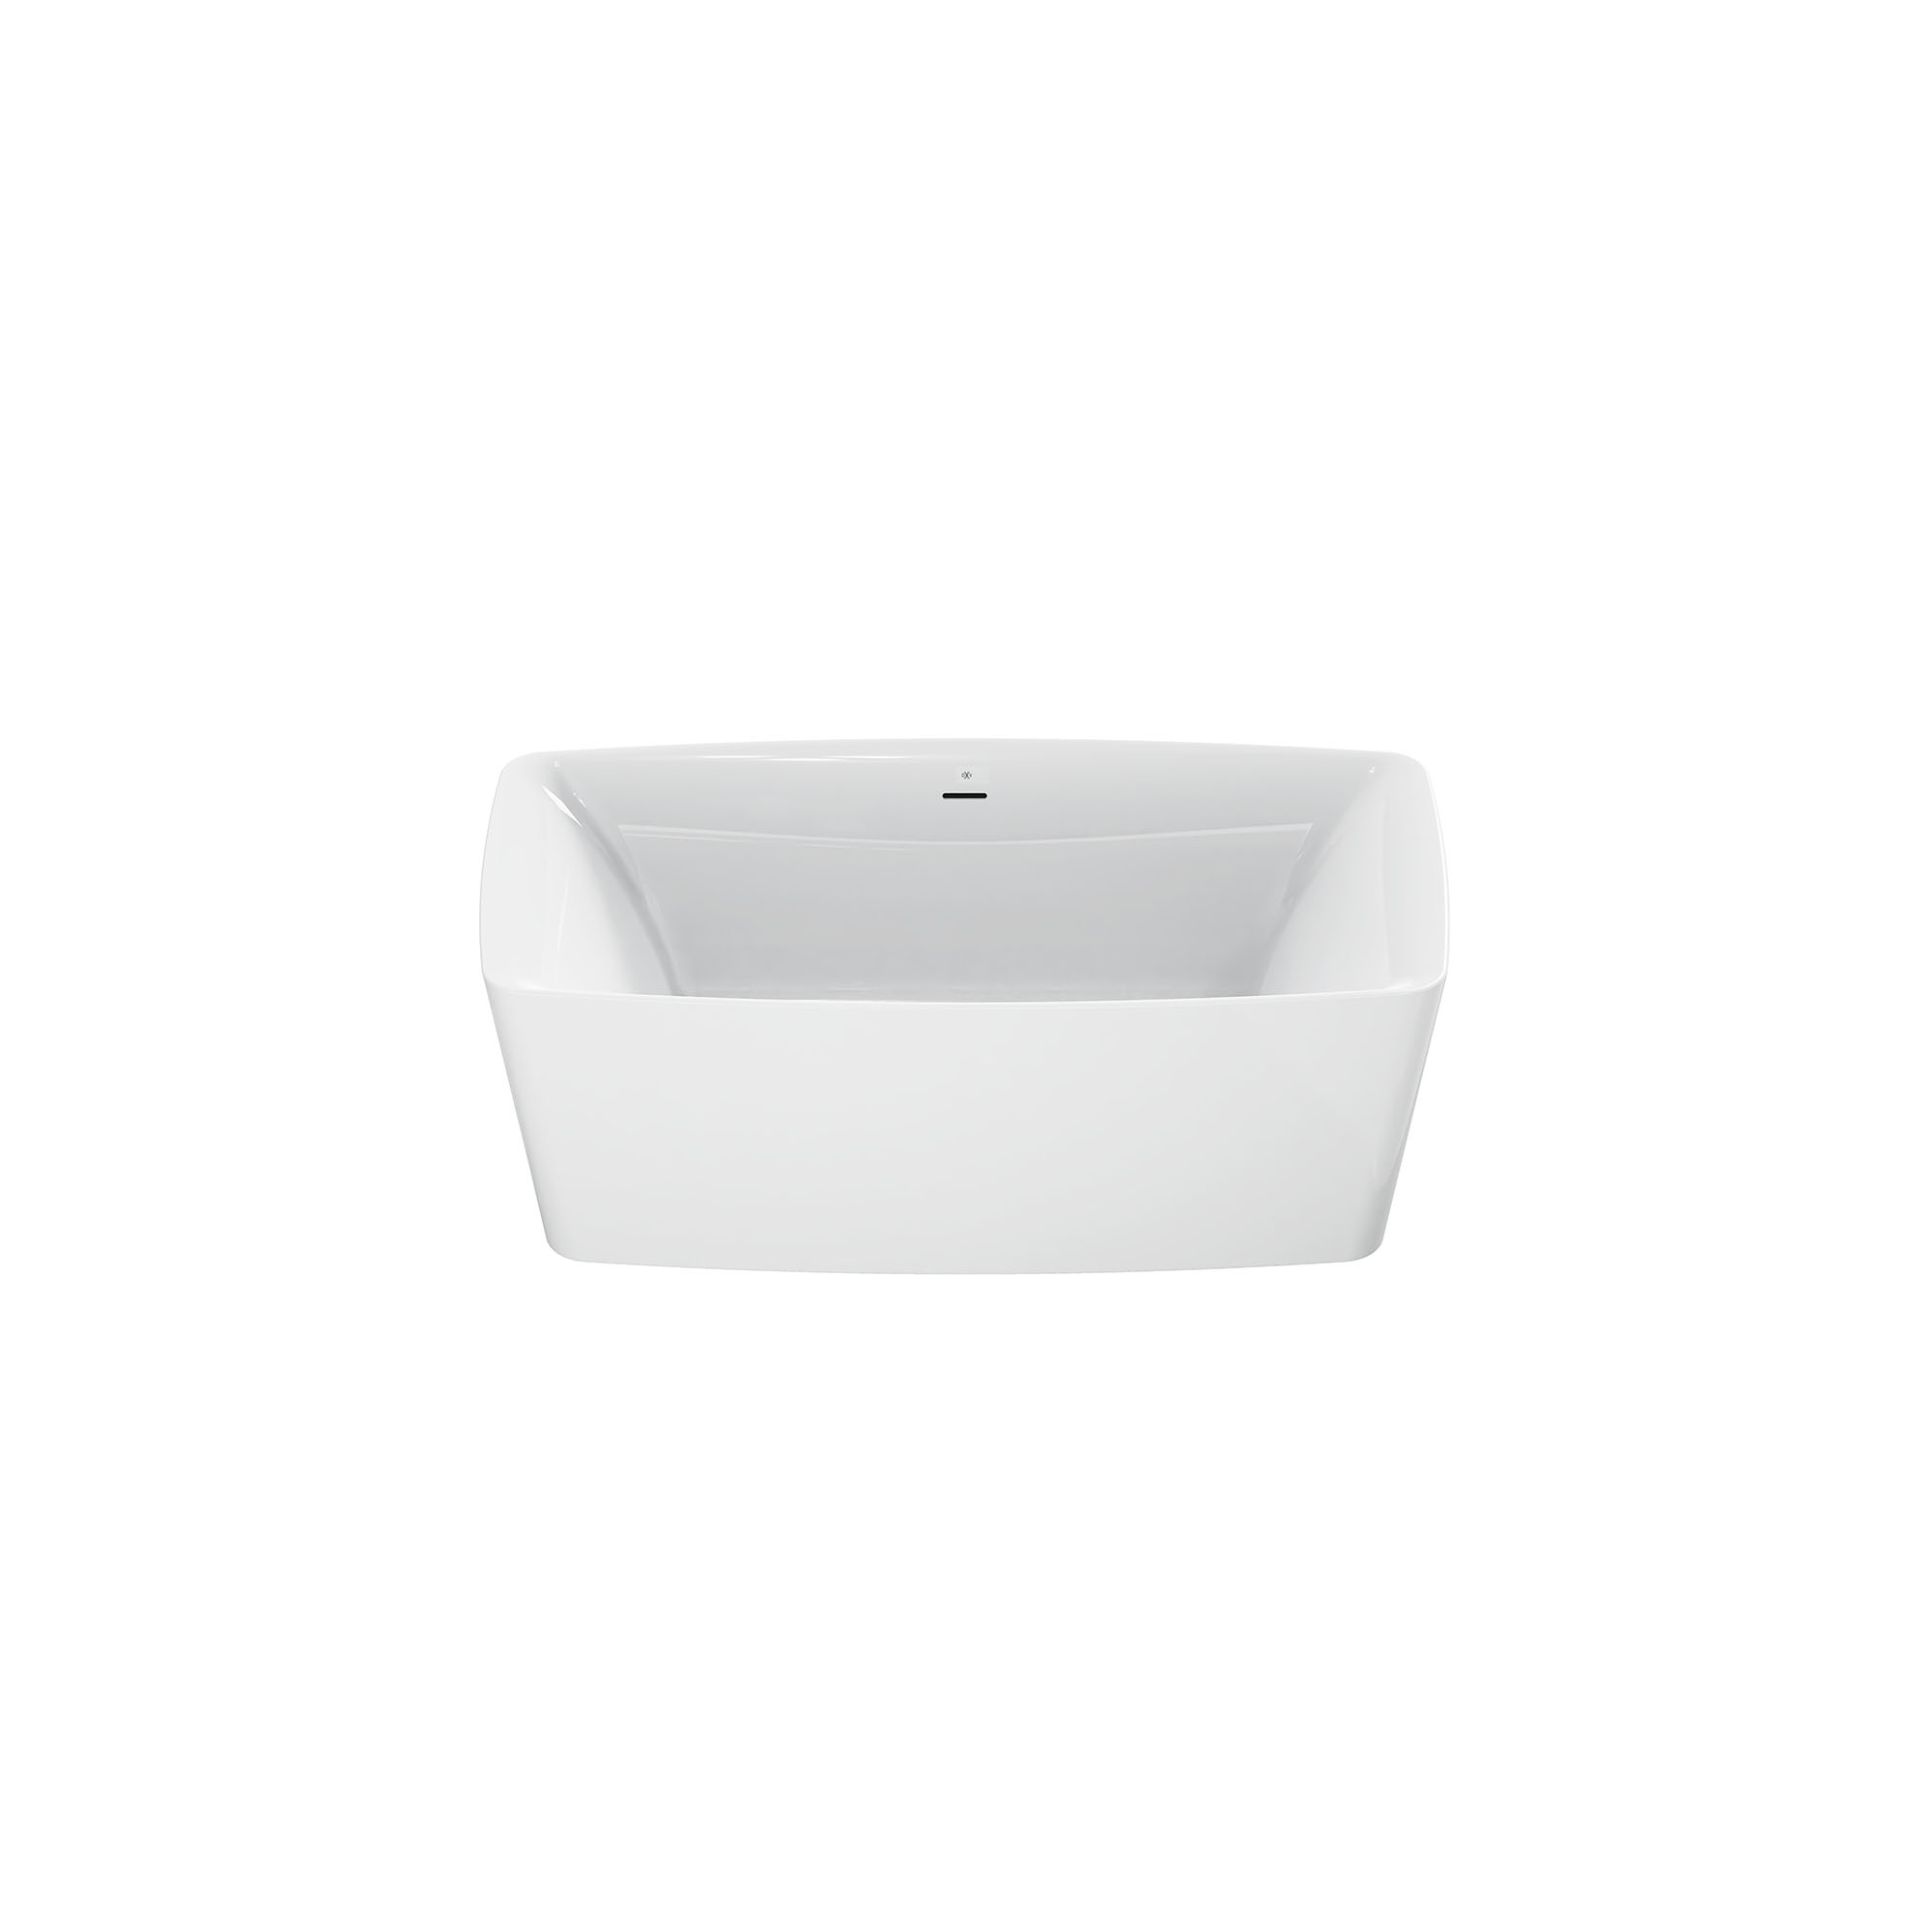 Equility® 67 in. x 33 in. Freestanding Bathtub